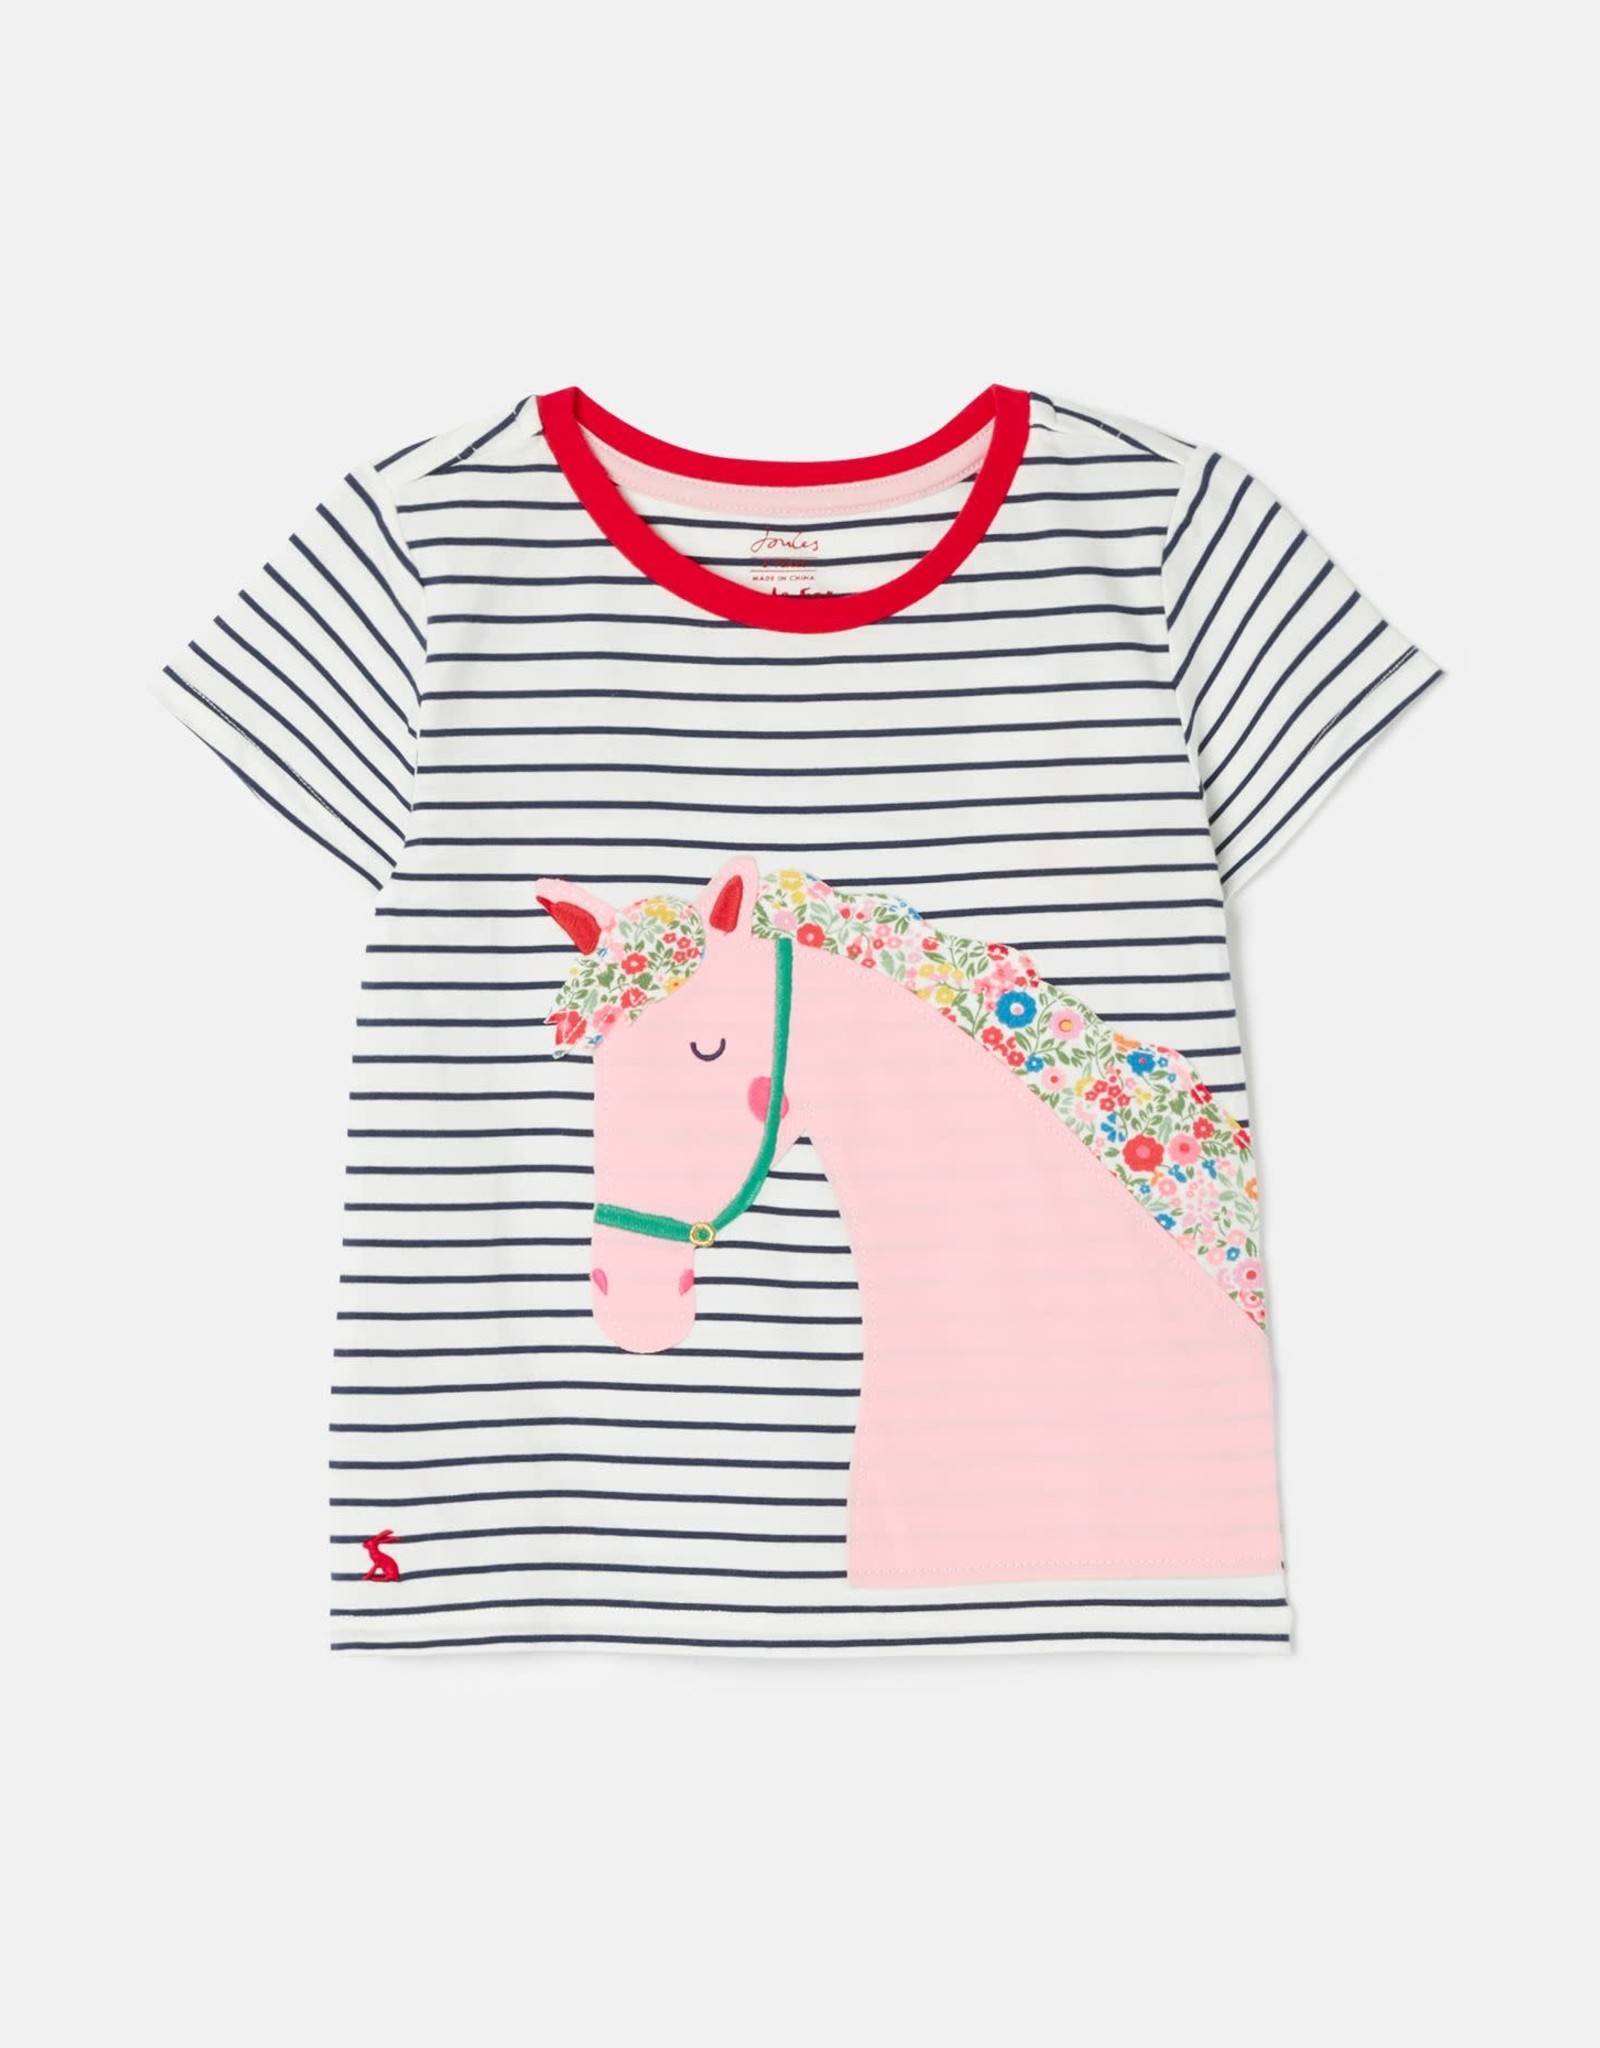 Joules Astra Tee